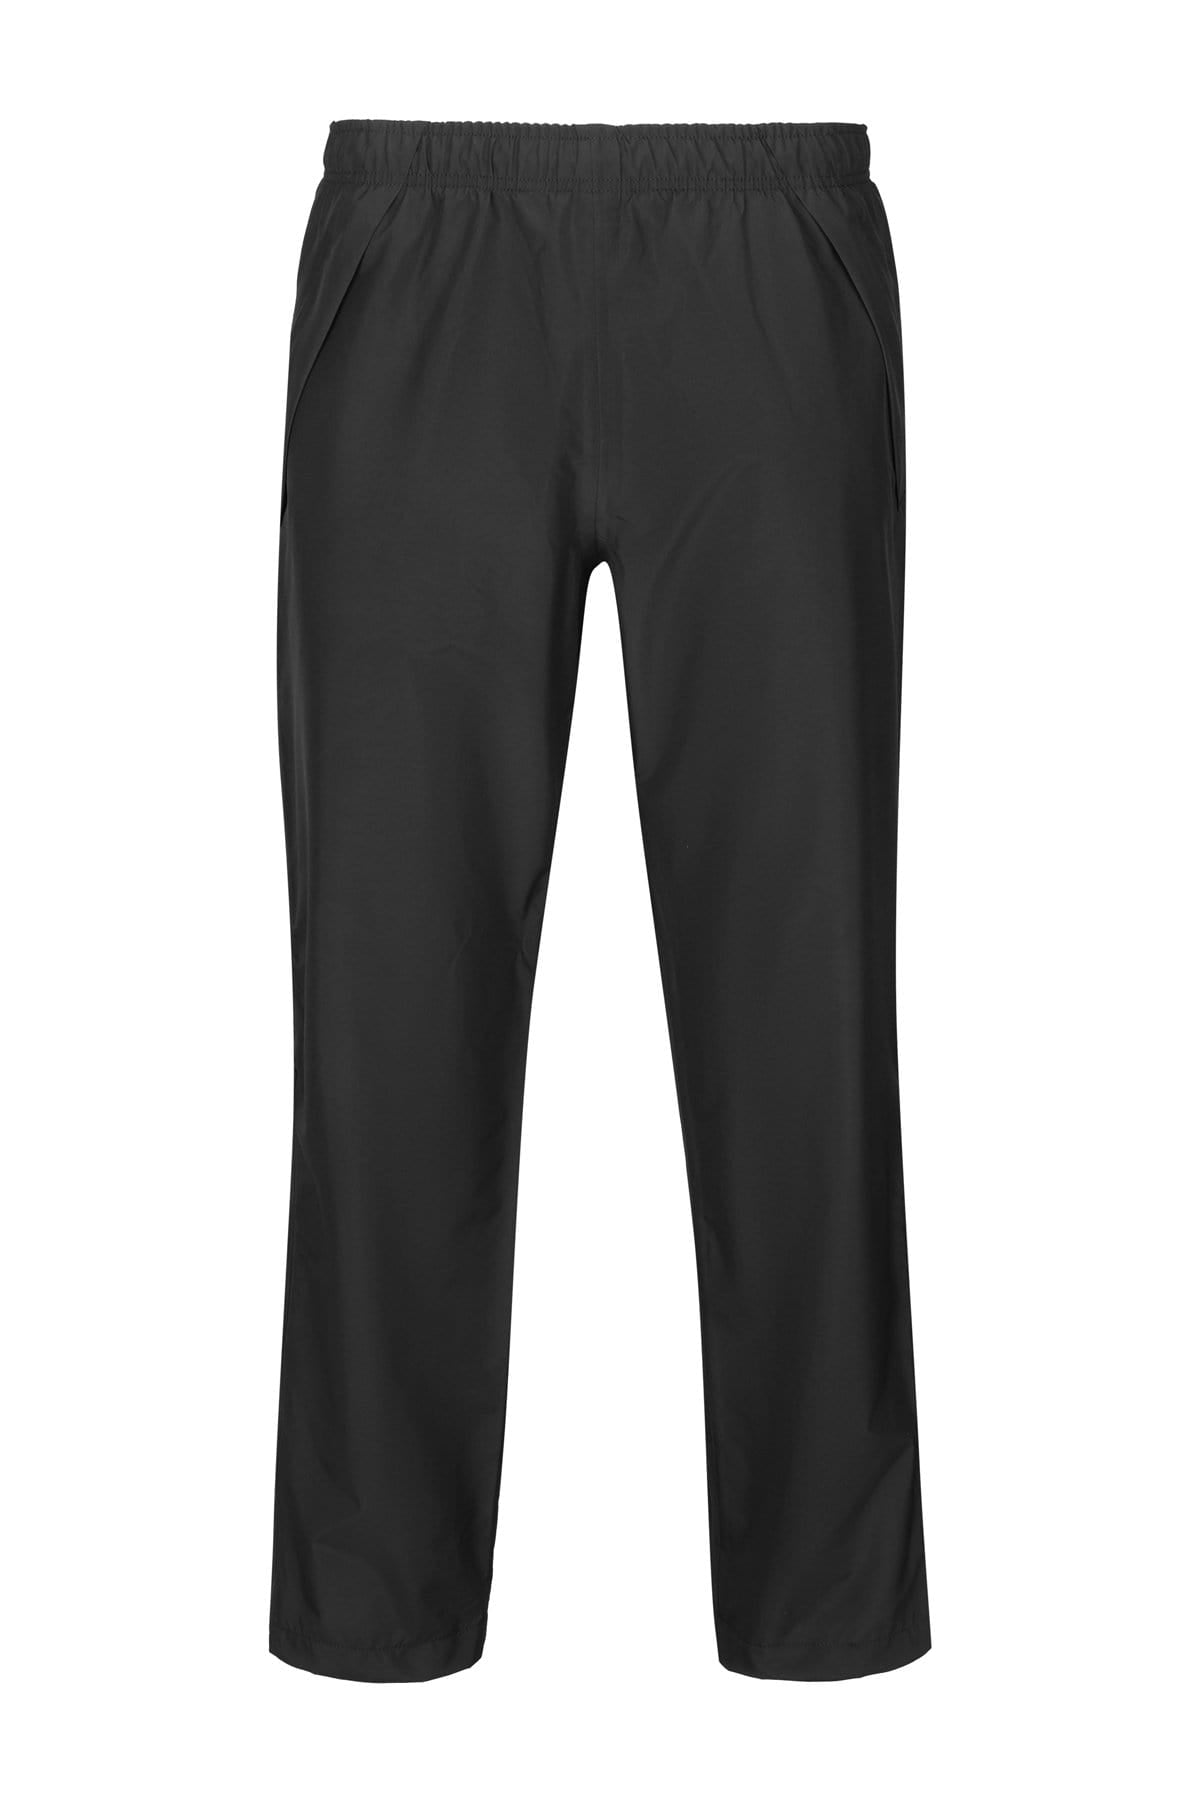 Male Poly Cotton Men Dark Grey Track Pant, Solid at Rs 290/piece in  Jalandhar | ID: 2852491305088